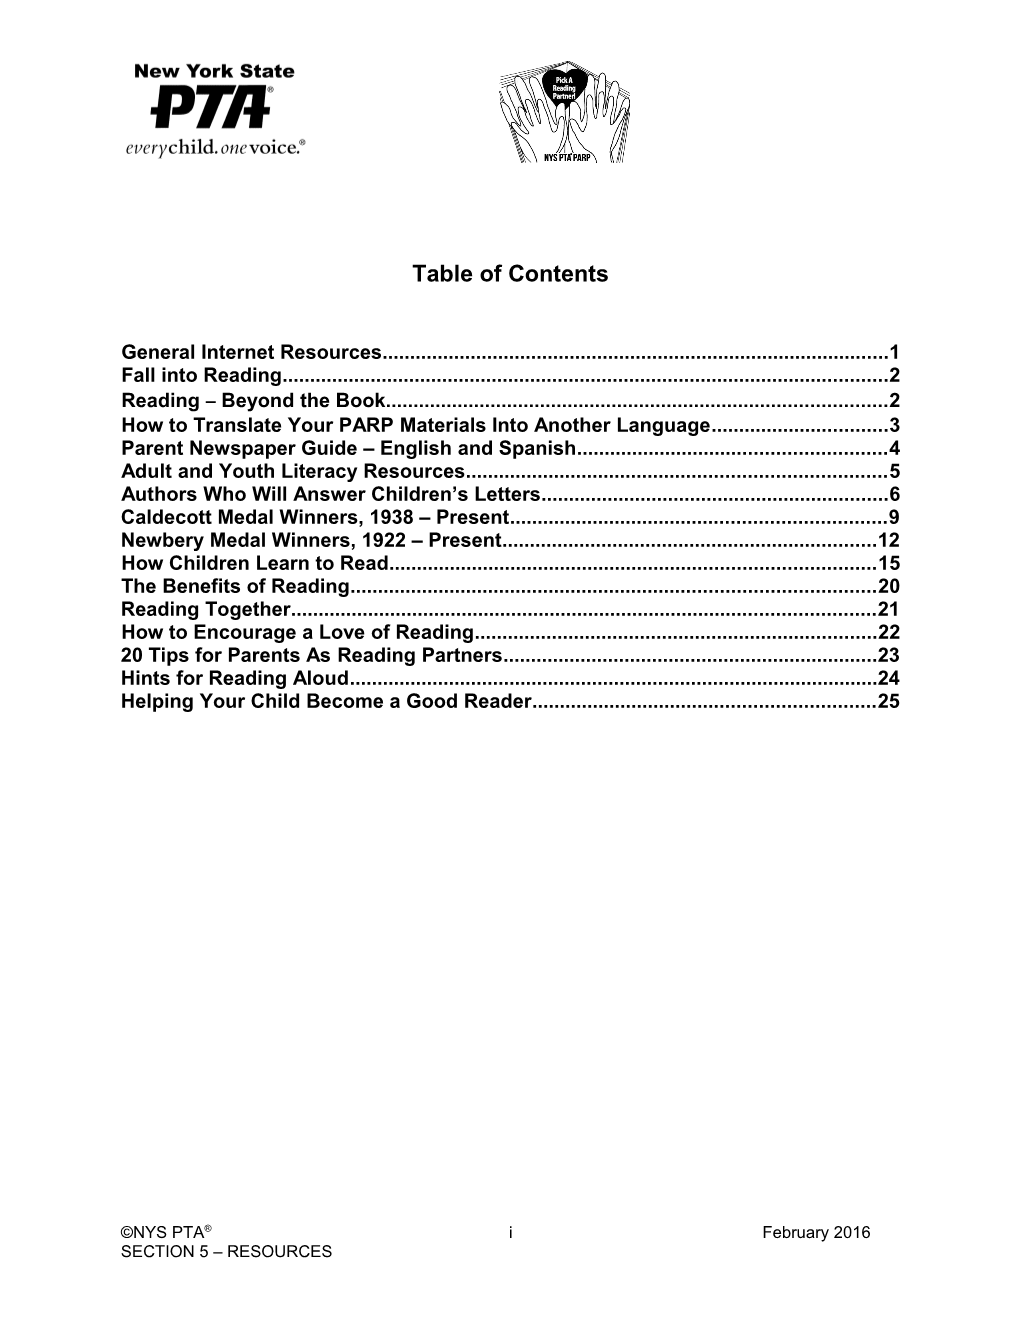 Table of Contents s177